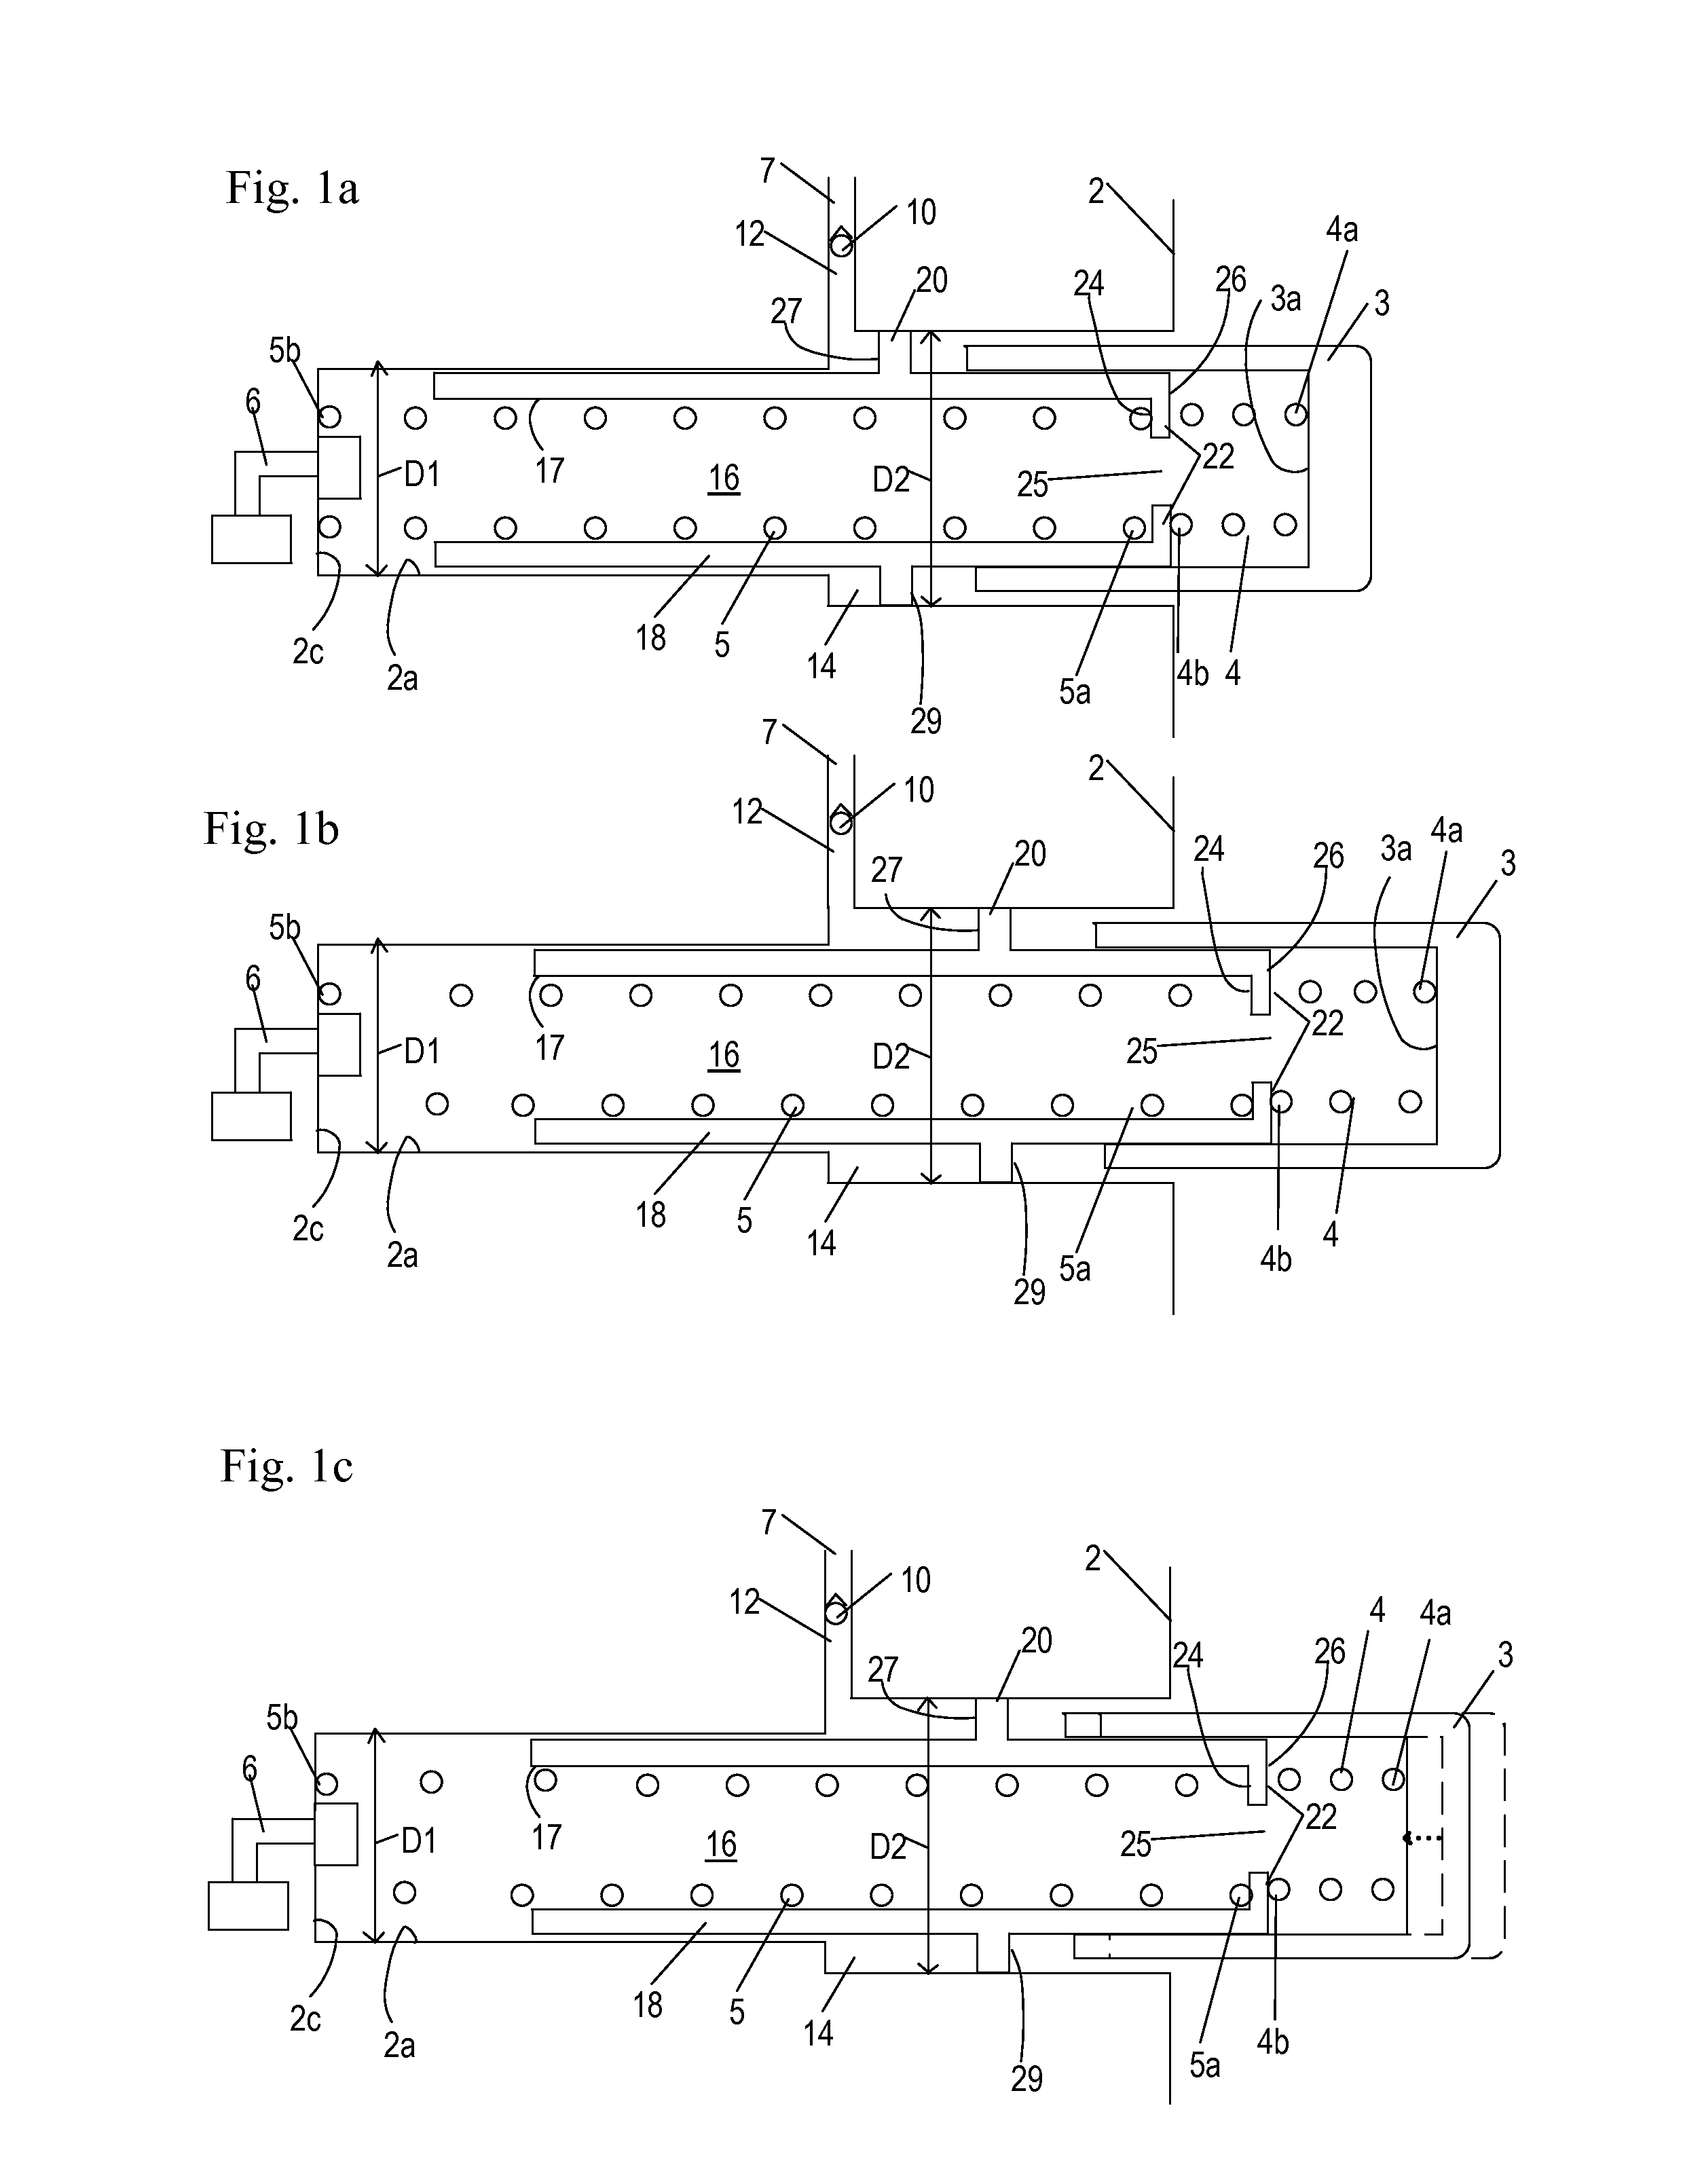 Chain drive tensioner spring force control mechanism